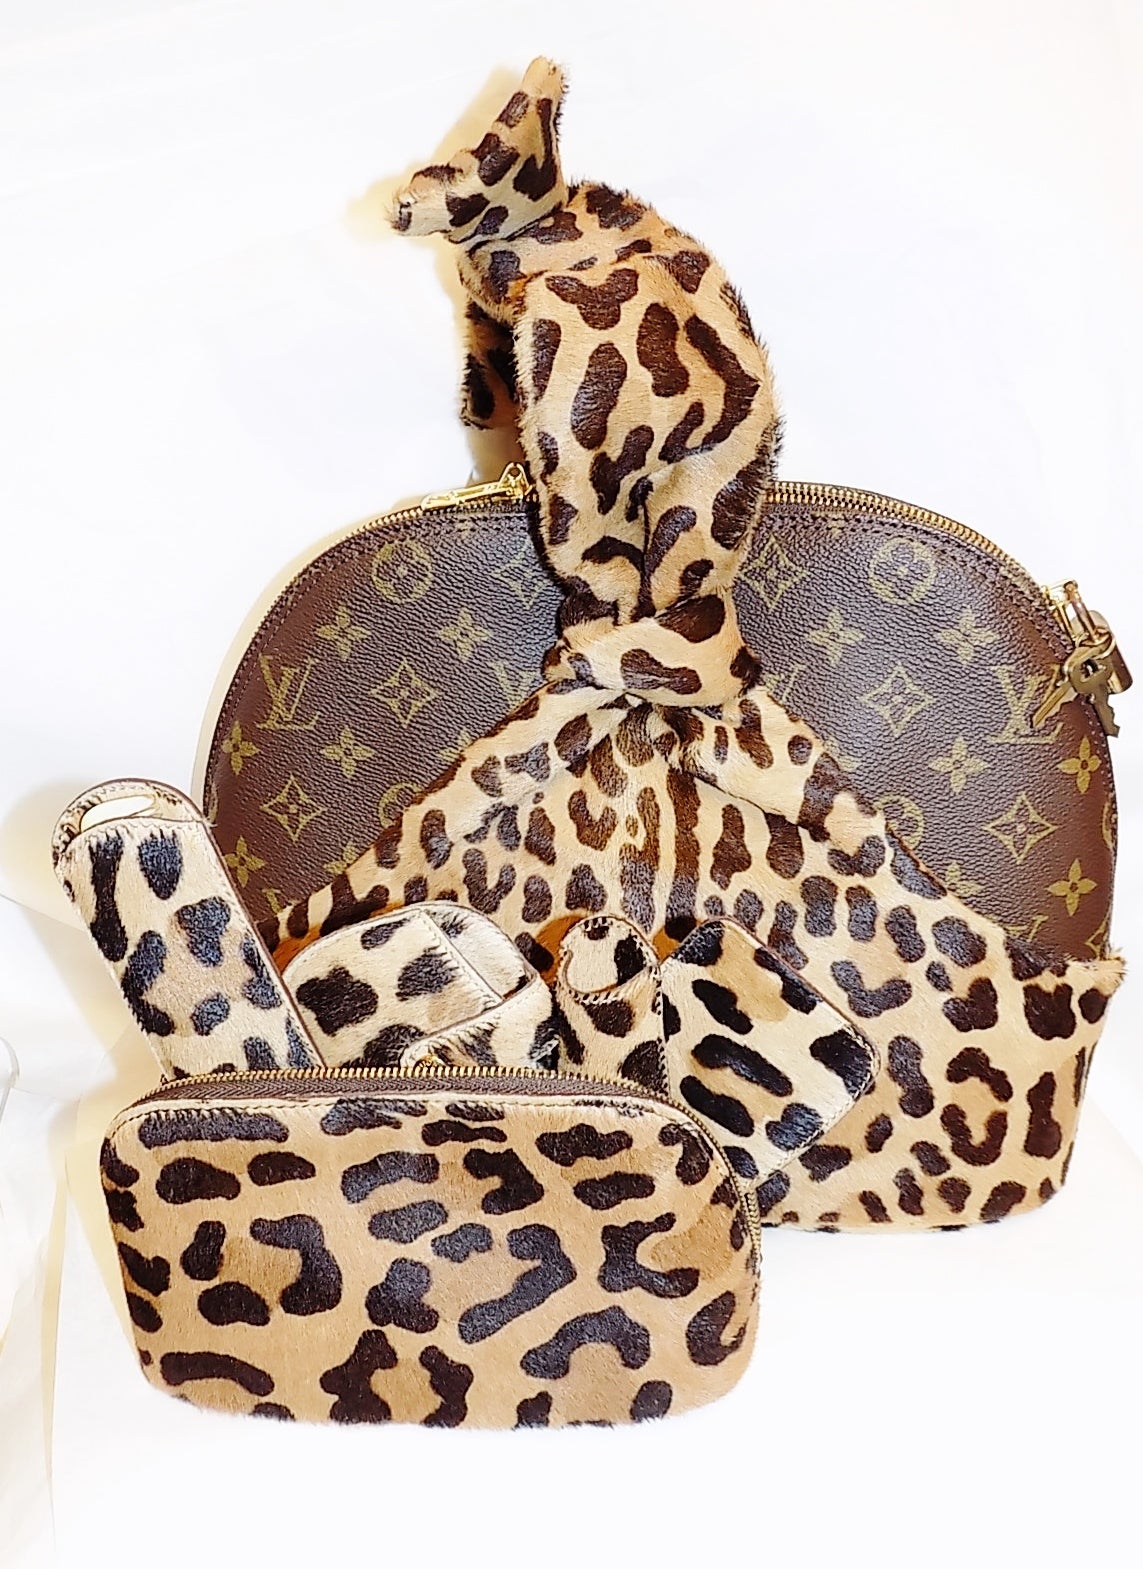 Louis Vuitton Alma Alaia Leopard Limited Edition Bag New with Accessories at 1stdibs